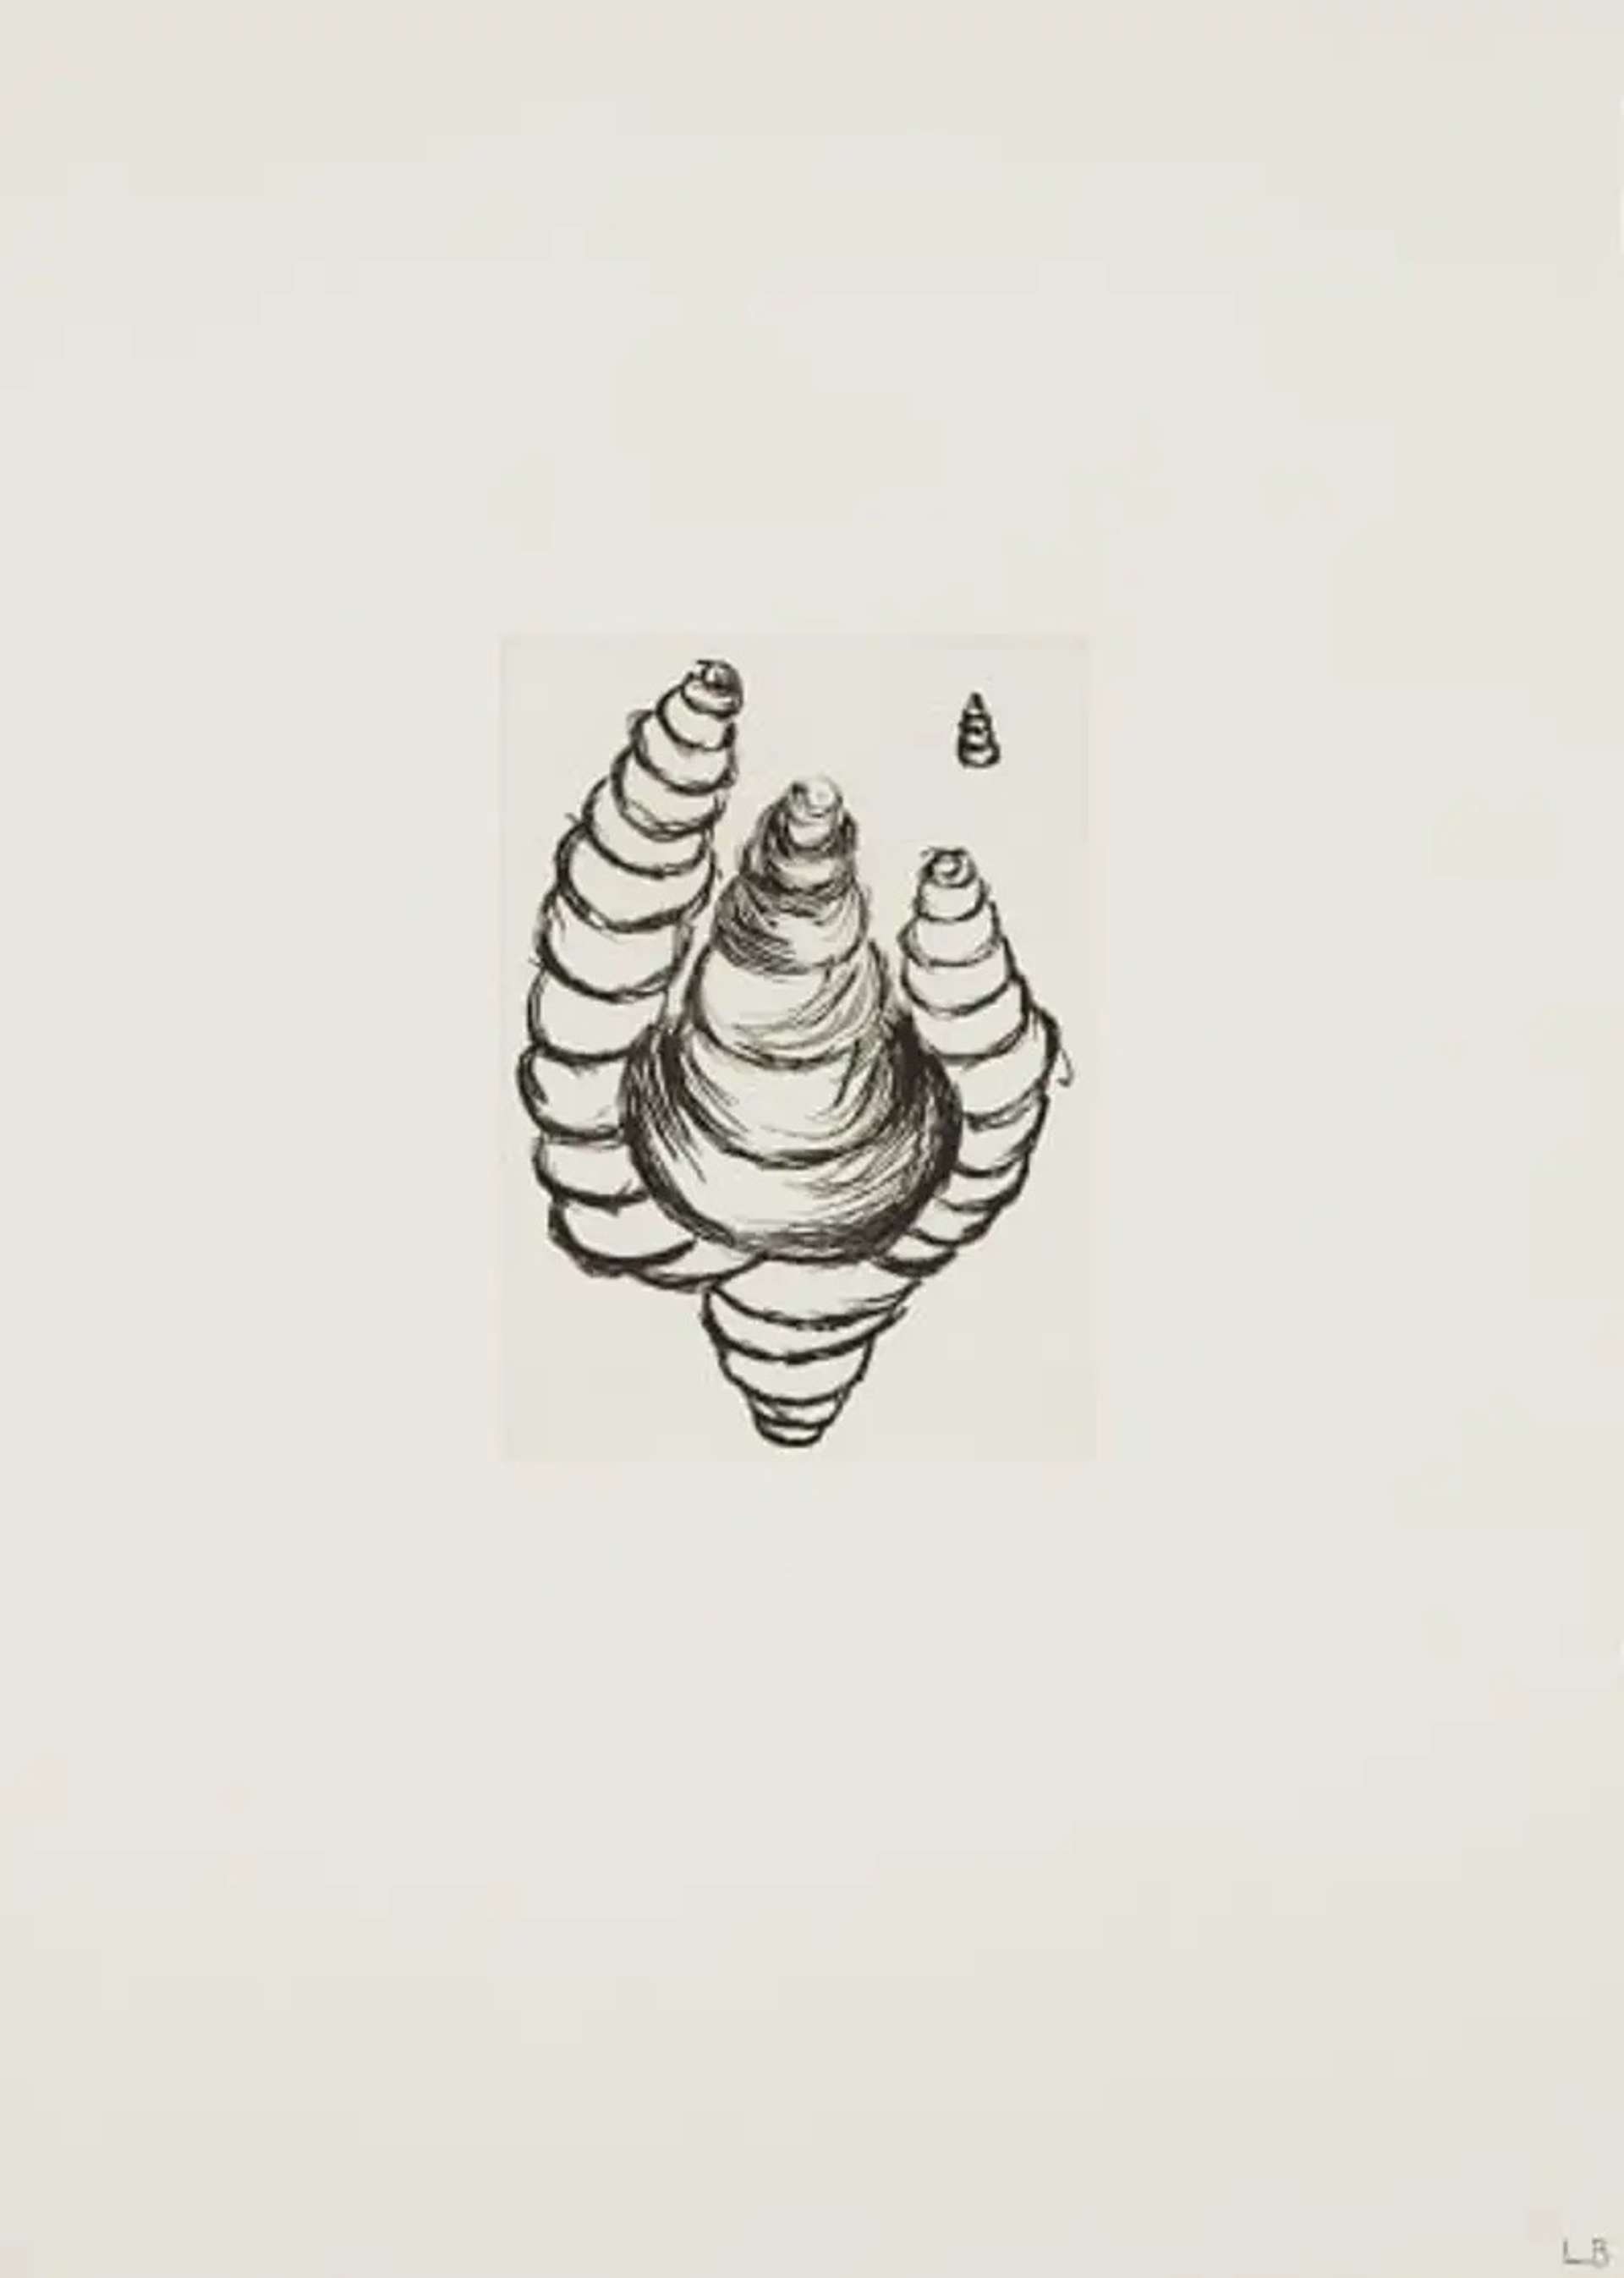 Louise Bourgeois Untitled No. 12. A monochromatic etching of an anatomical depiction of black swirls in a vertical pattern resembling cones.